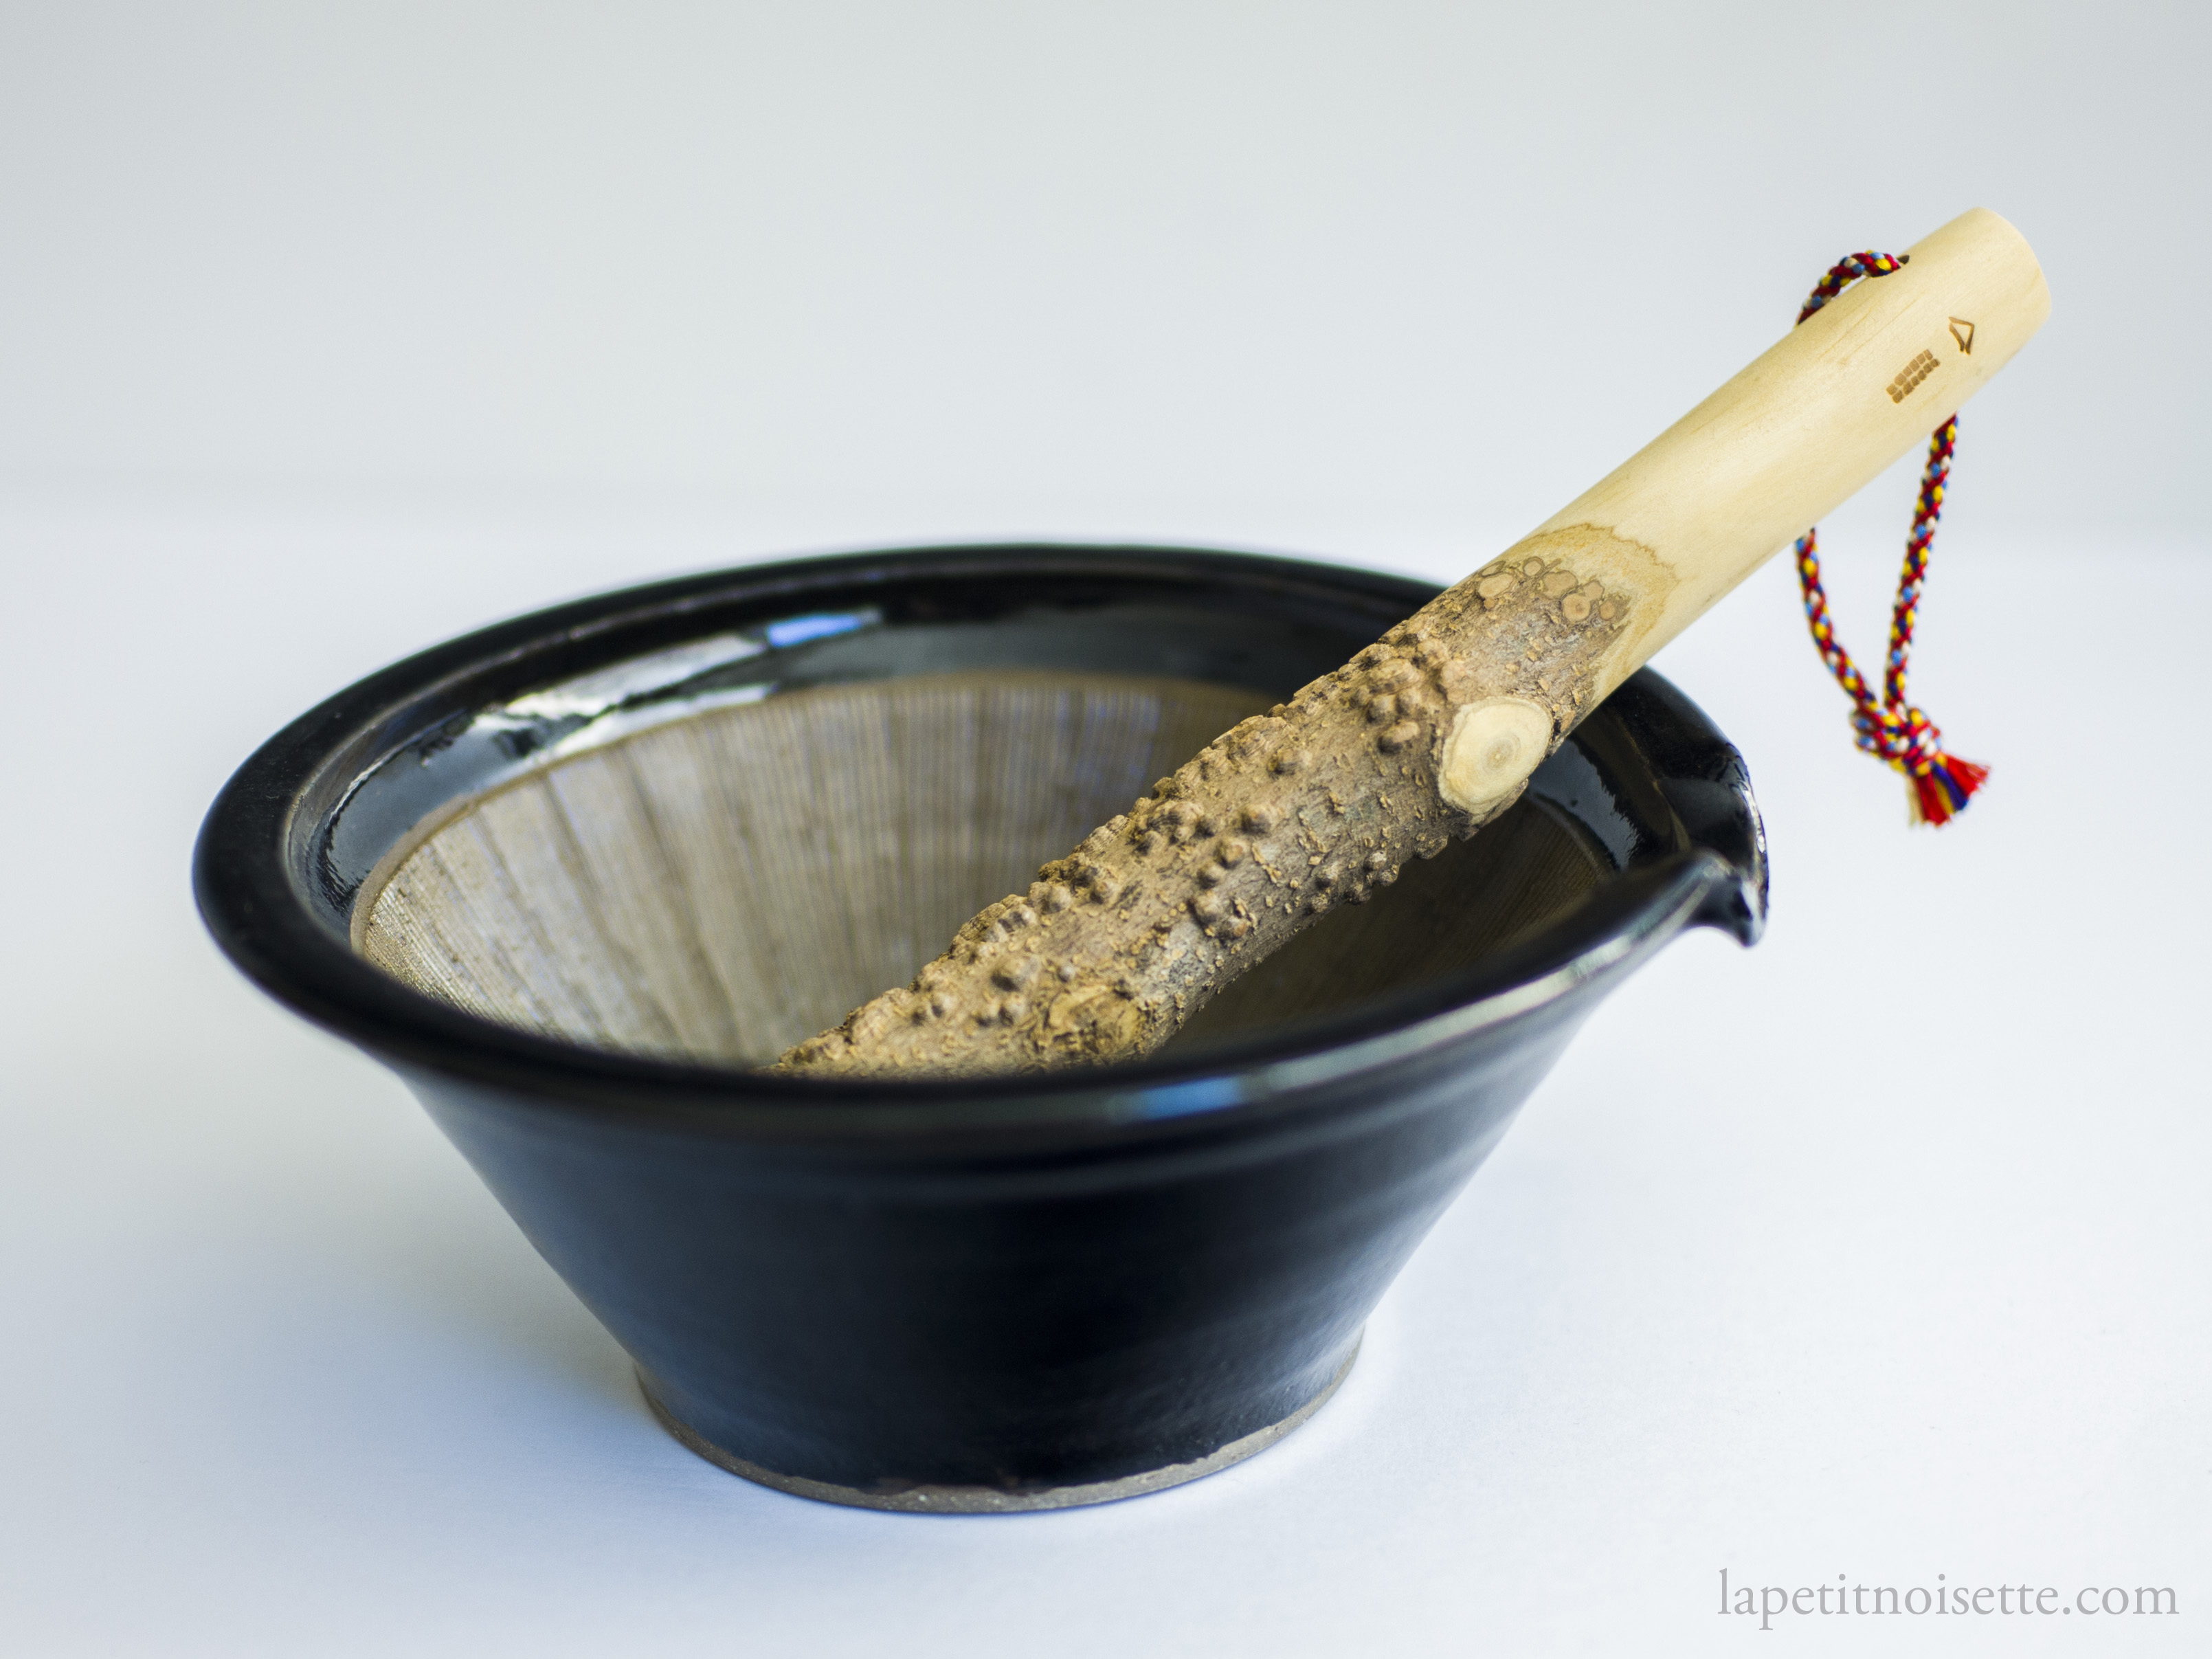 Kobo Kiln's (耕房窯) suribachi (擂鉢) grinding bowl and surikogi (擂粉木) pestle in collaboration with Azmaya that is made from Iga soil and sasho pepper wood. 